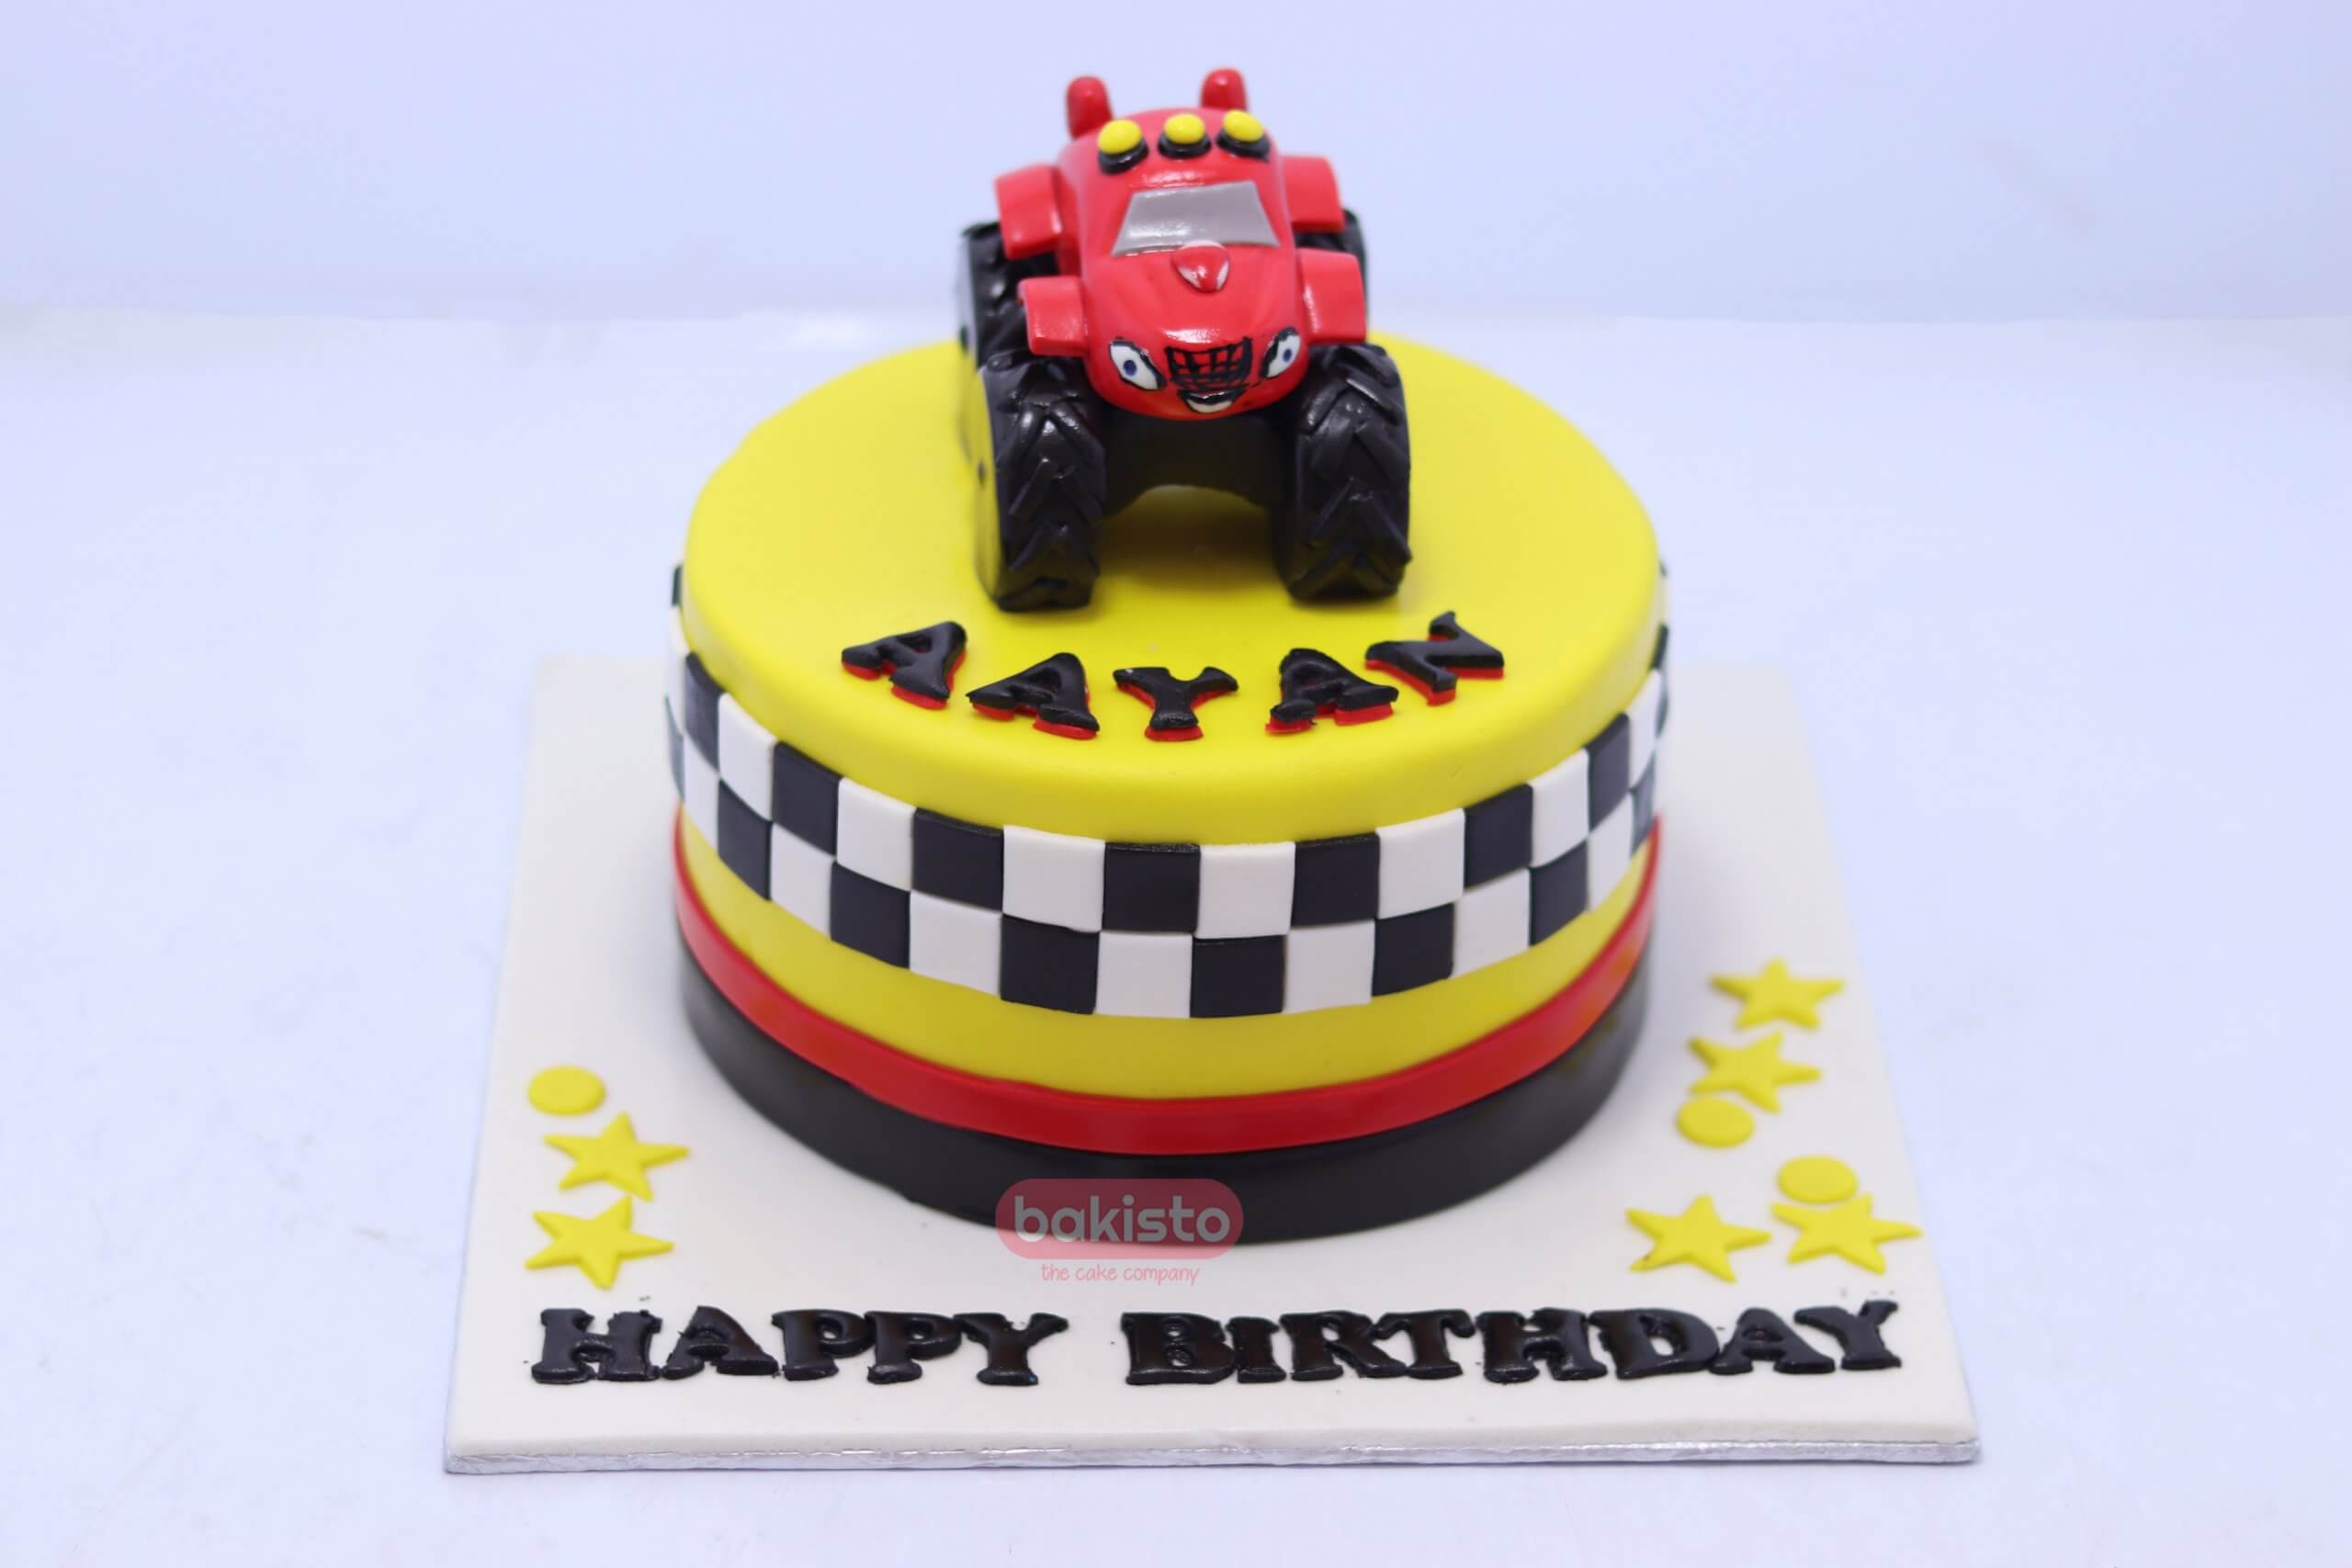 Cars theme cake in White by Creme Castle